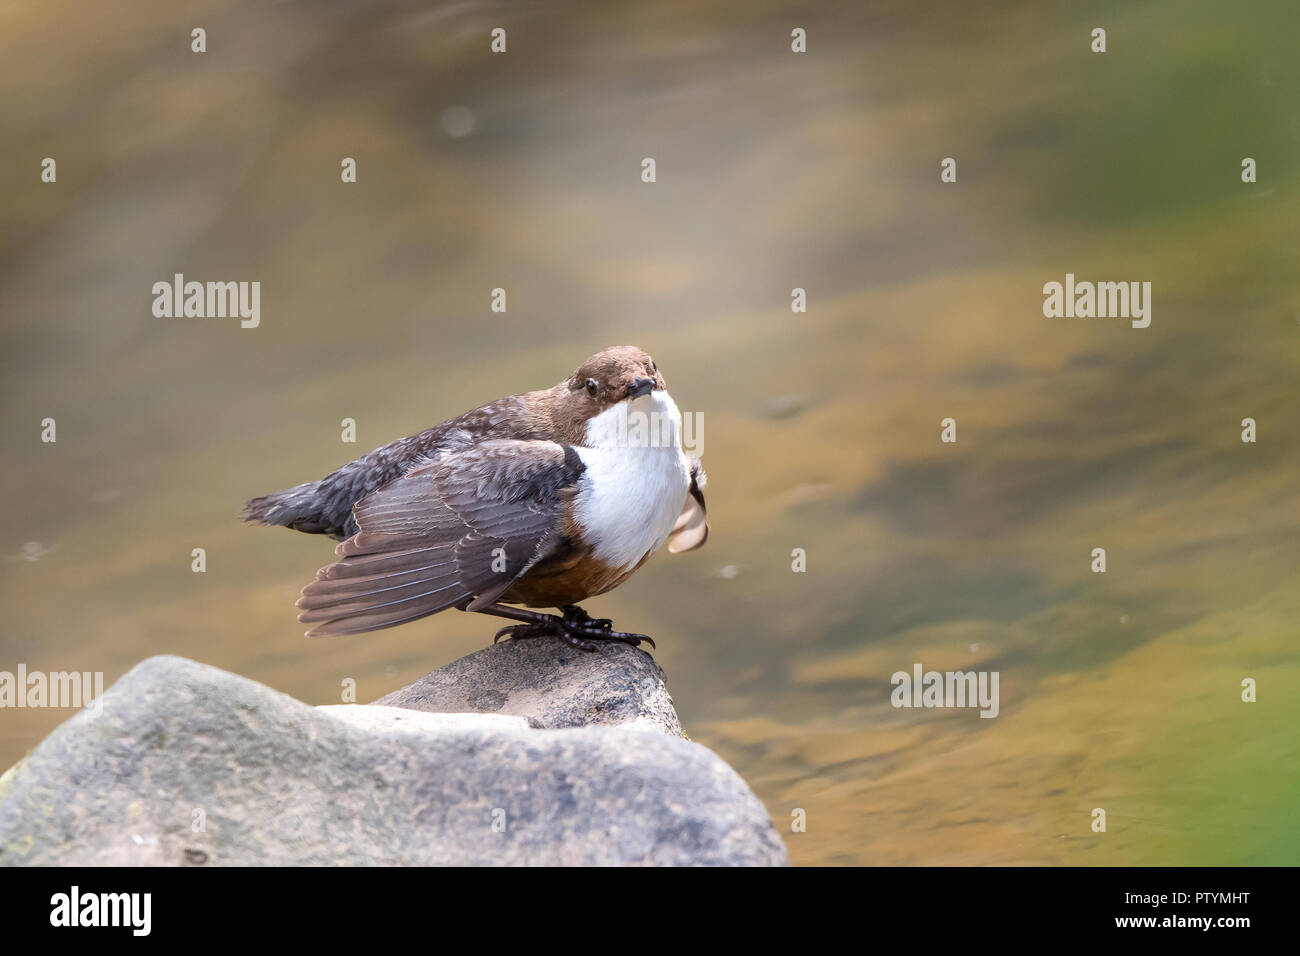 Close up of perky wild UK dipper bird (Cinclus cinclus) on rocks at water's edge in sunshine, flapping wings. Motion blur in flowing stream. Stock Photo